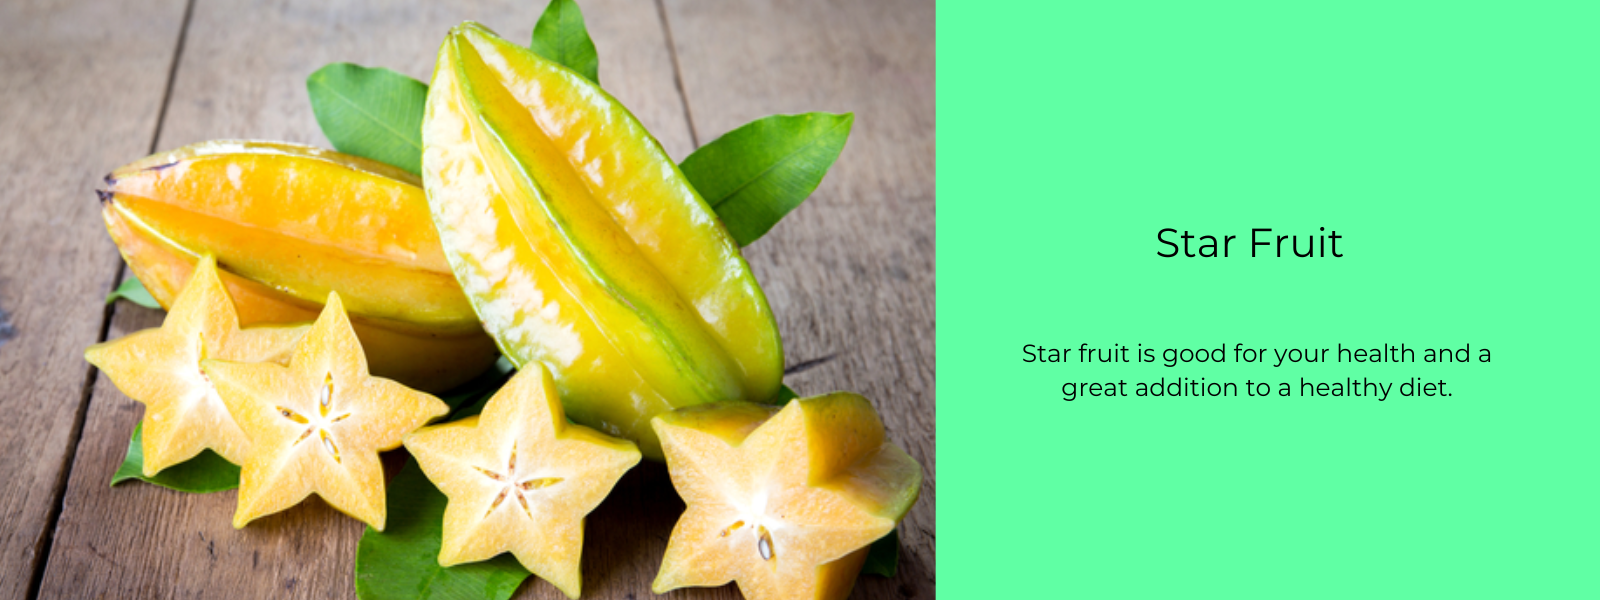 Star Fruit - Health Benefits, Uses and Important Facts